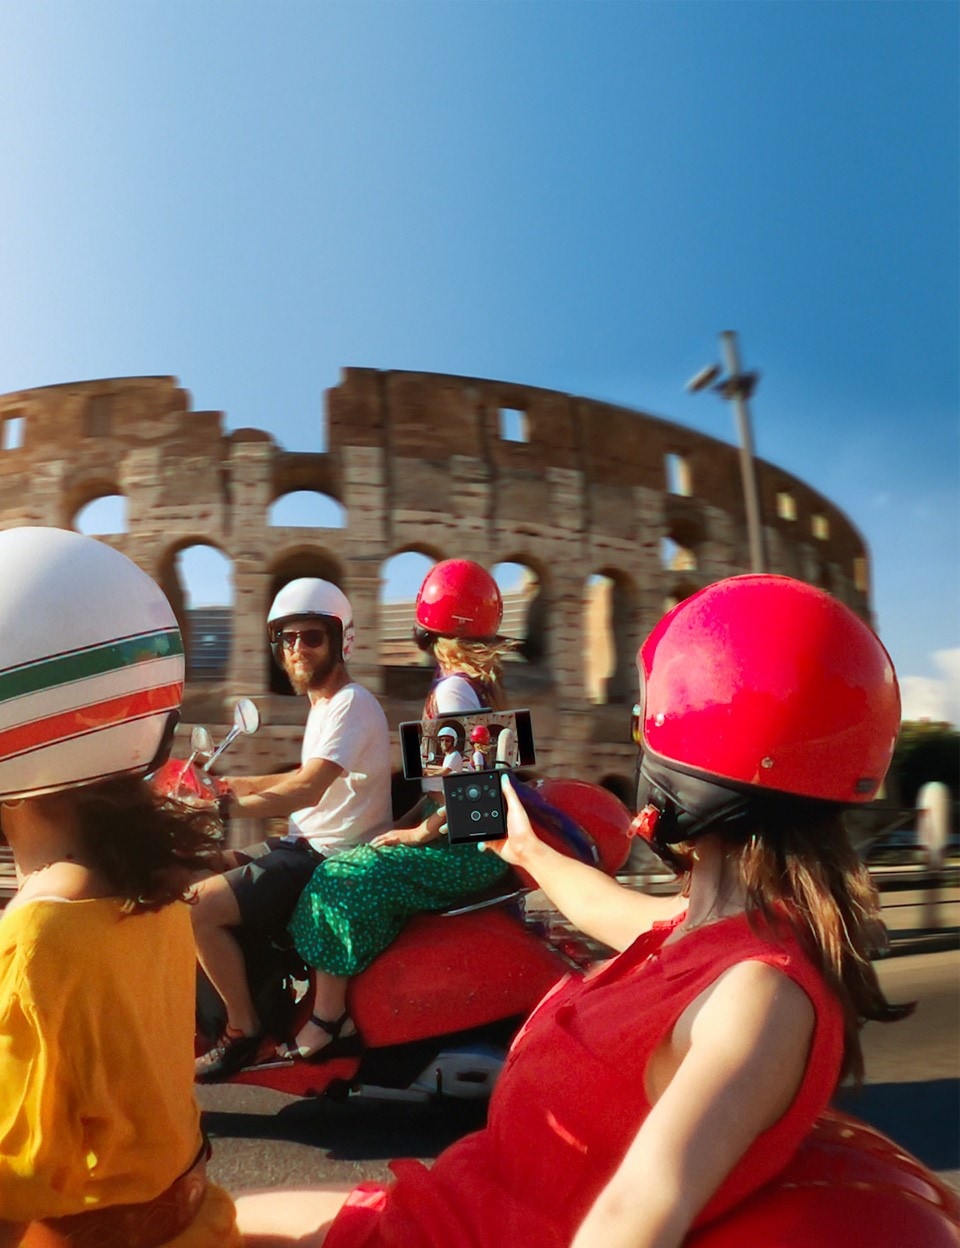 A woman recording herself on the LG WING while riding vespa past the Colosseum in Rome